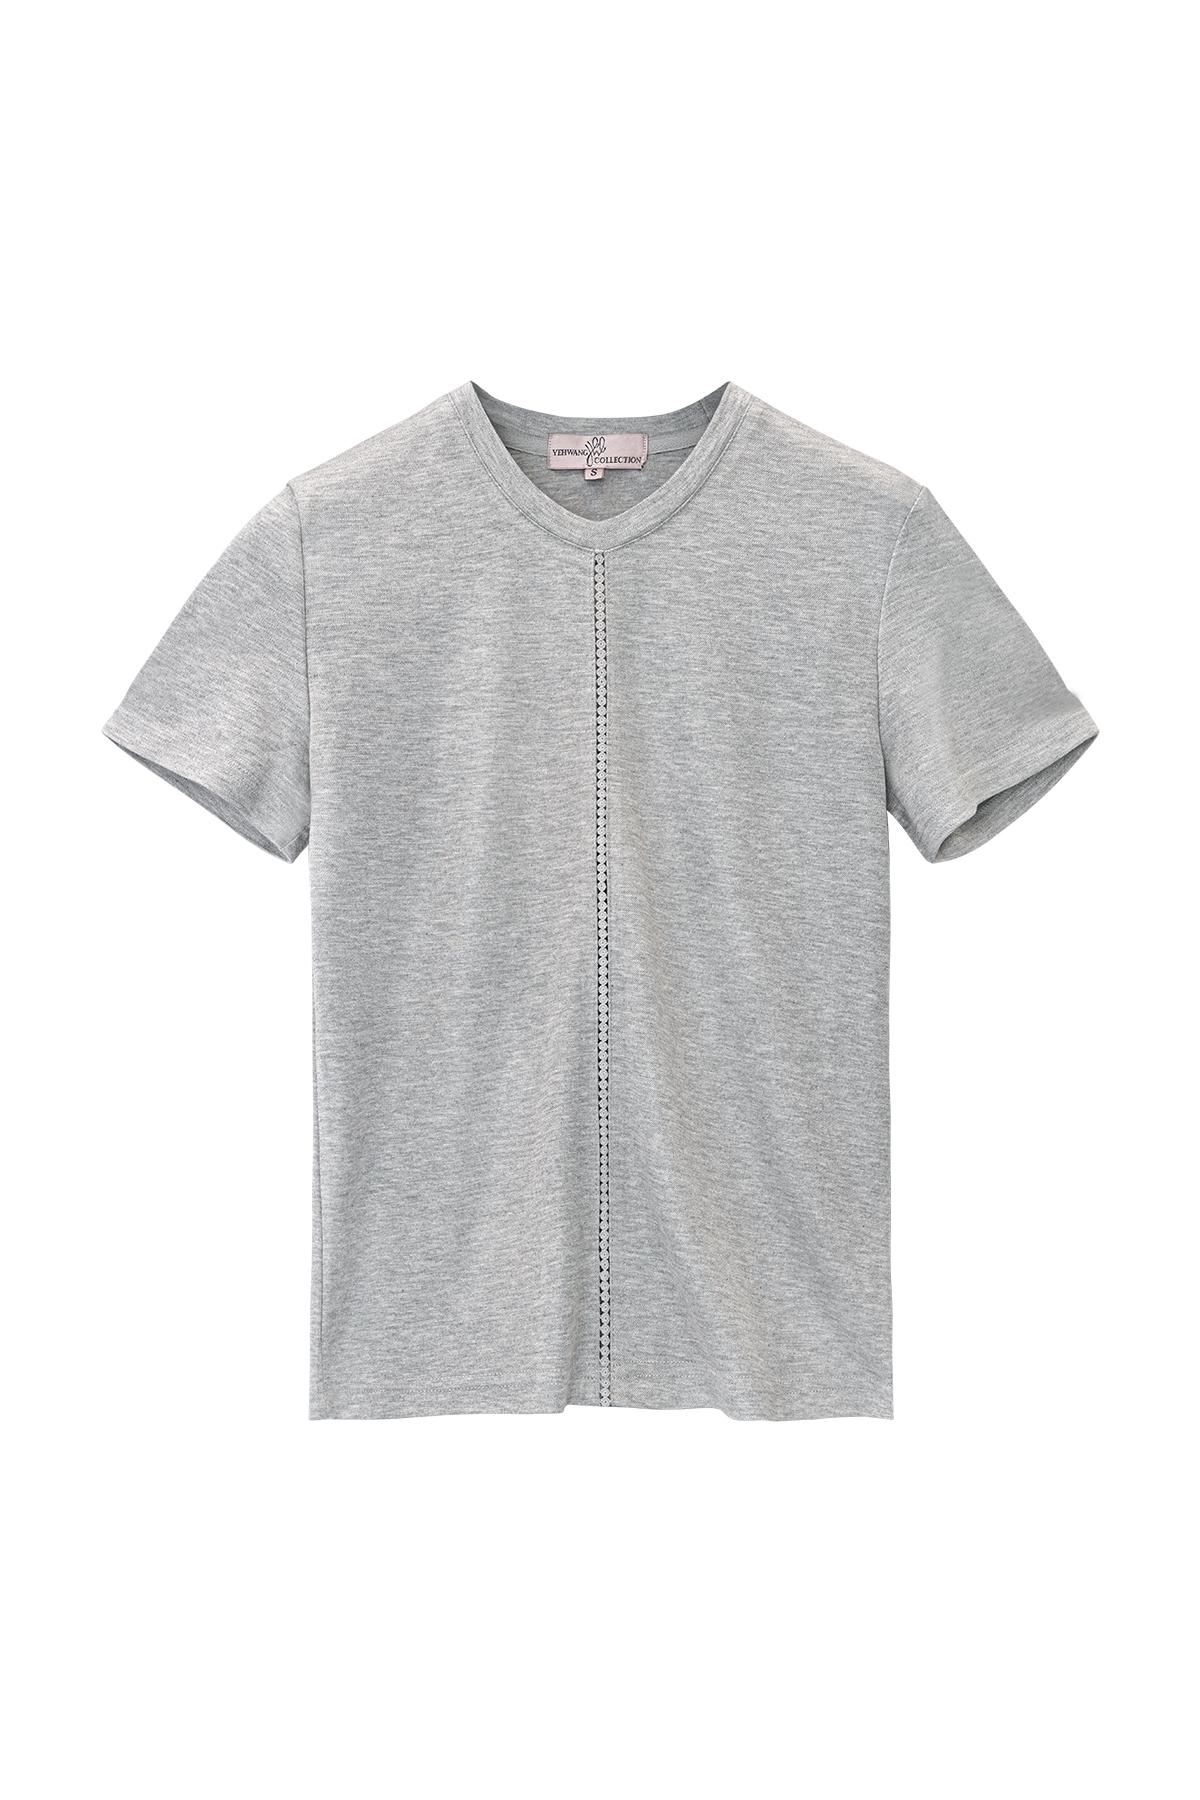 T-shirt with broderie stripe Grey S 